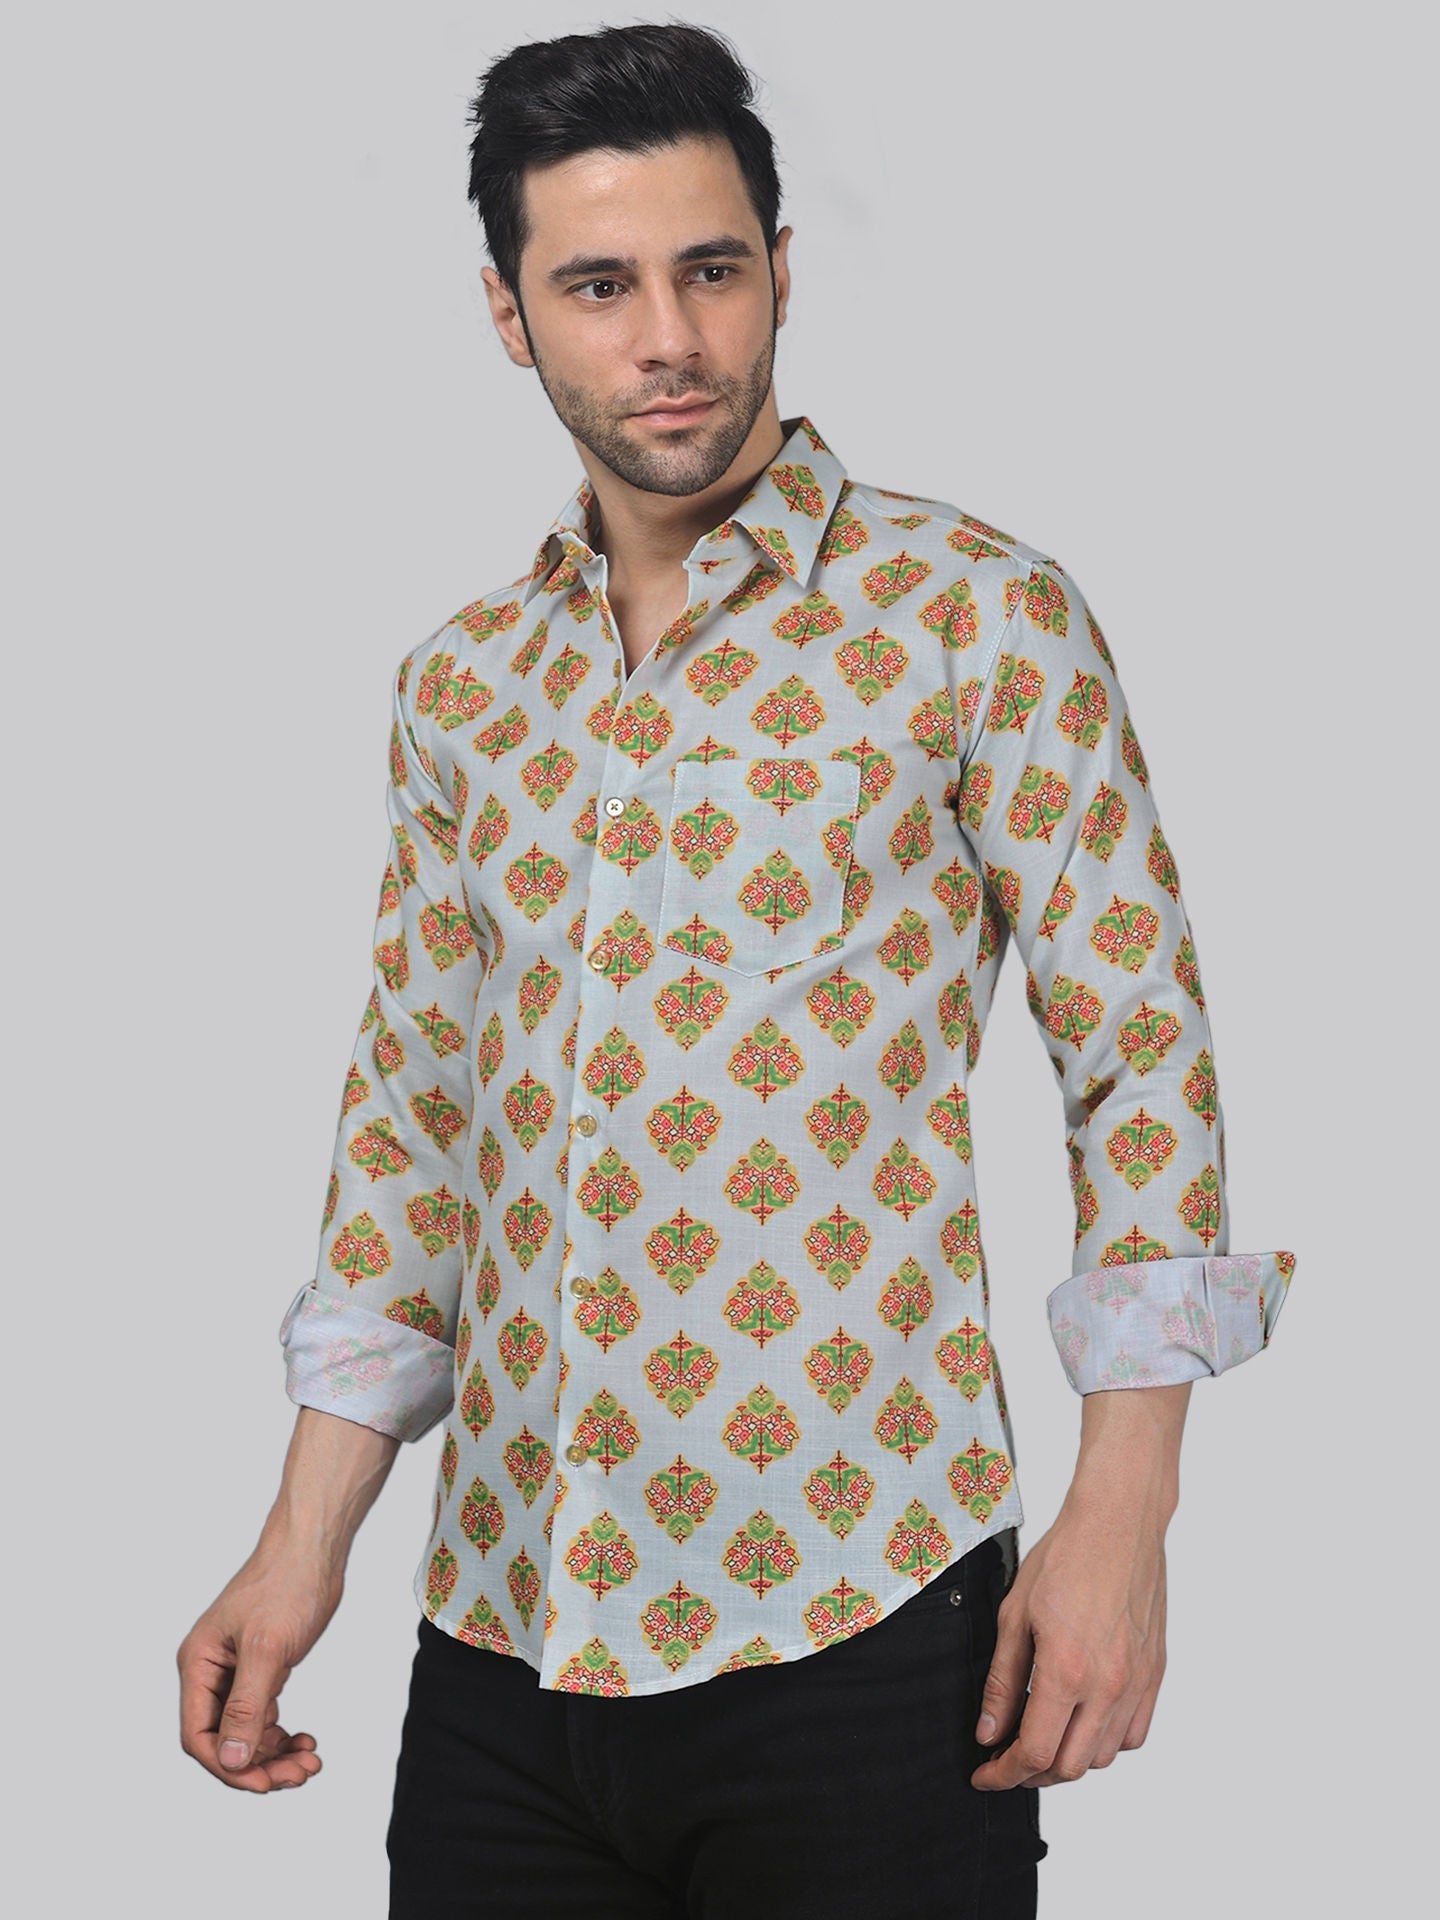 Eclectic Men's Printed Full Sleeve Casual Linen Shirt - TryBuy® USA🇺🇸